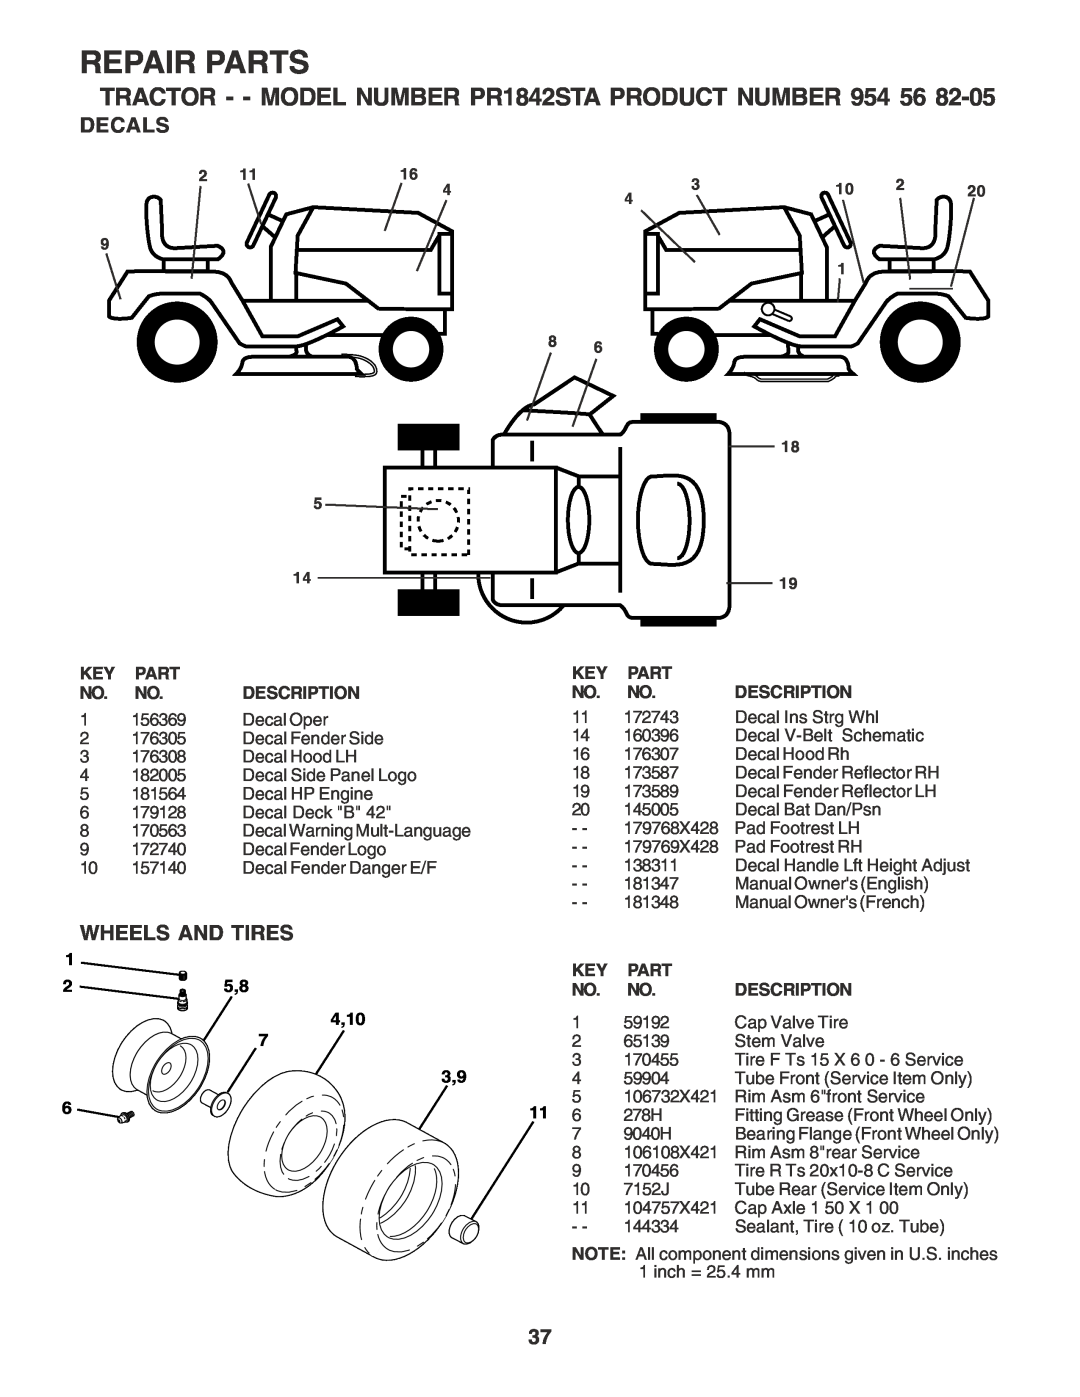 Poulan owner manual Decals, Wheels And Tires, Repair Parts, TRACTOR - - MODEL NUMBER PR1842STA PRODUCT NUMBER 954 